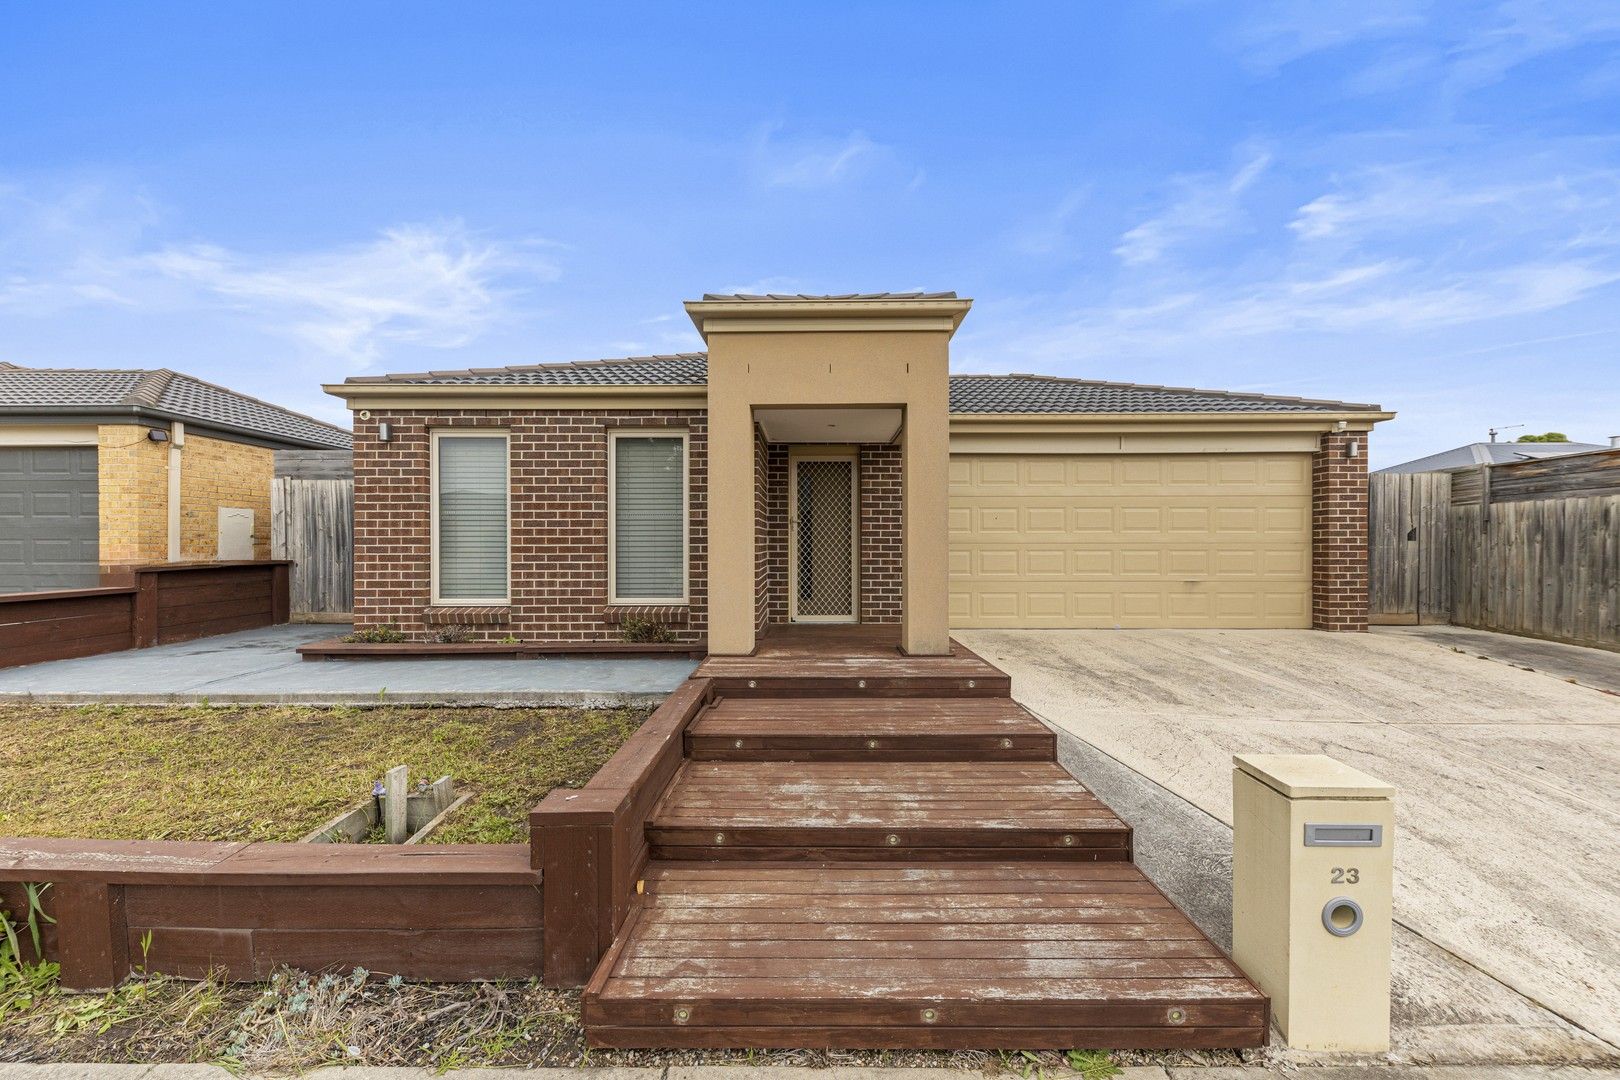 4 bedrooms House in 23 Currawong Crescent PAKENHAM VIC, 3810